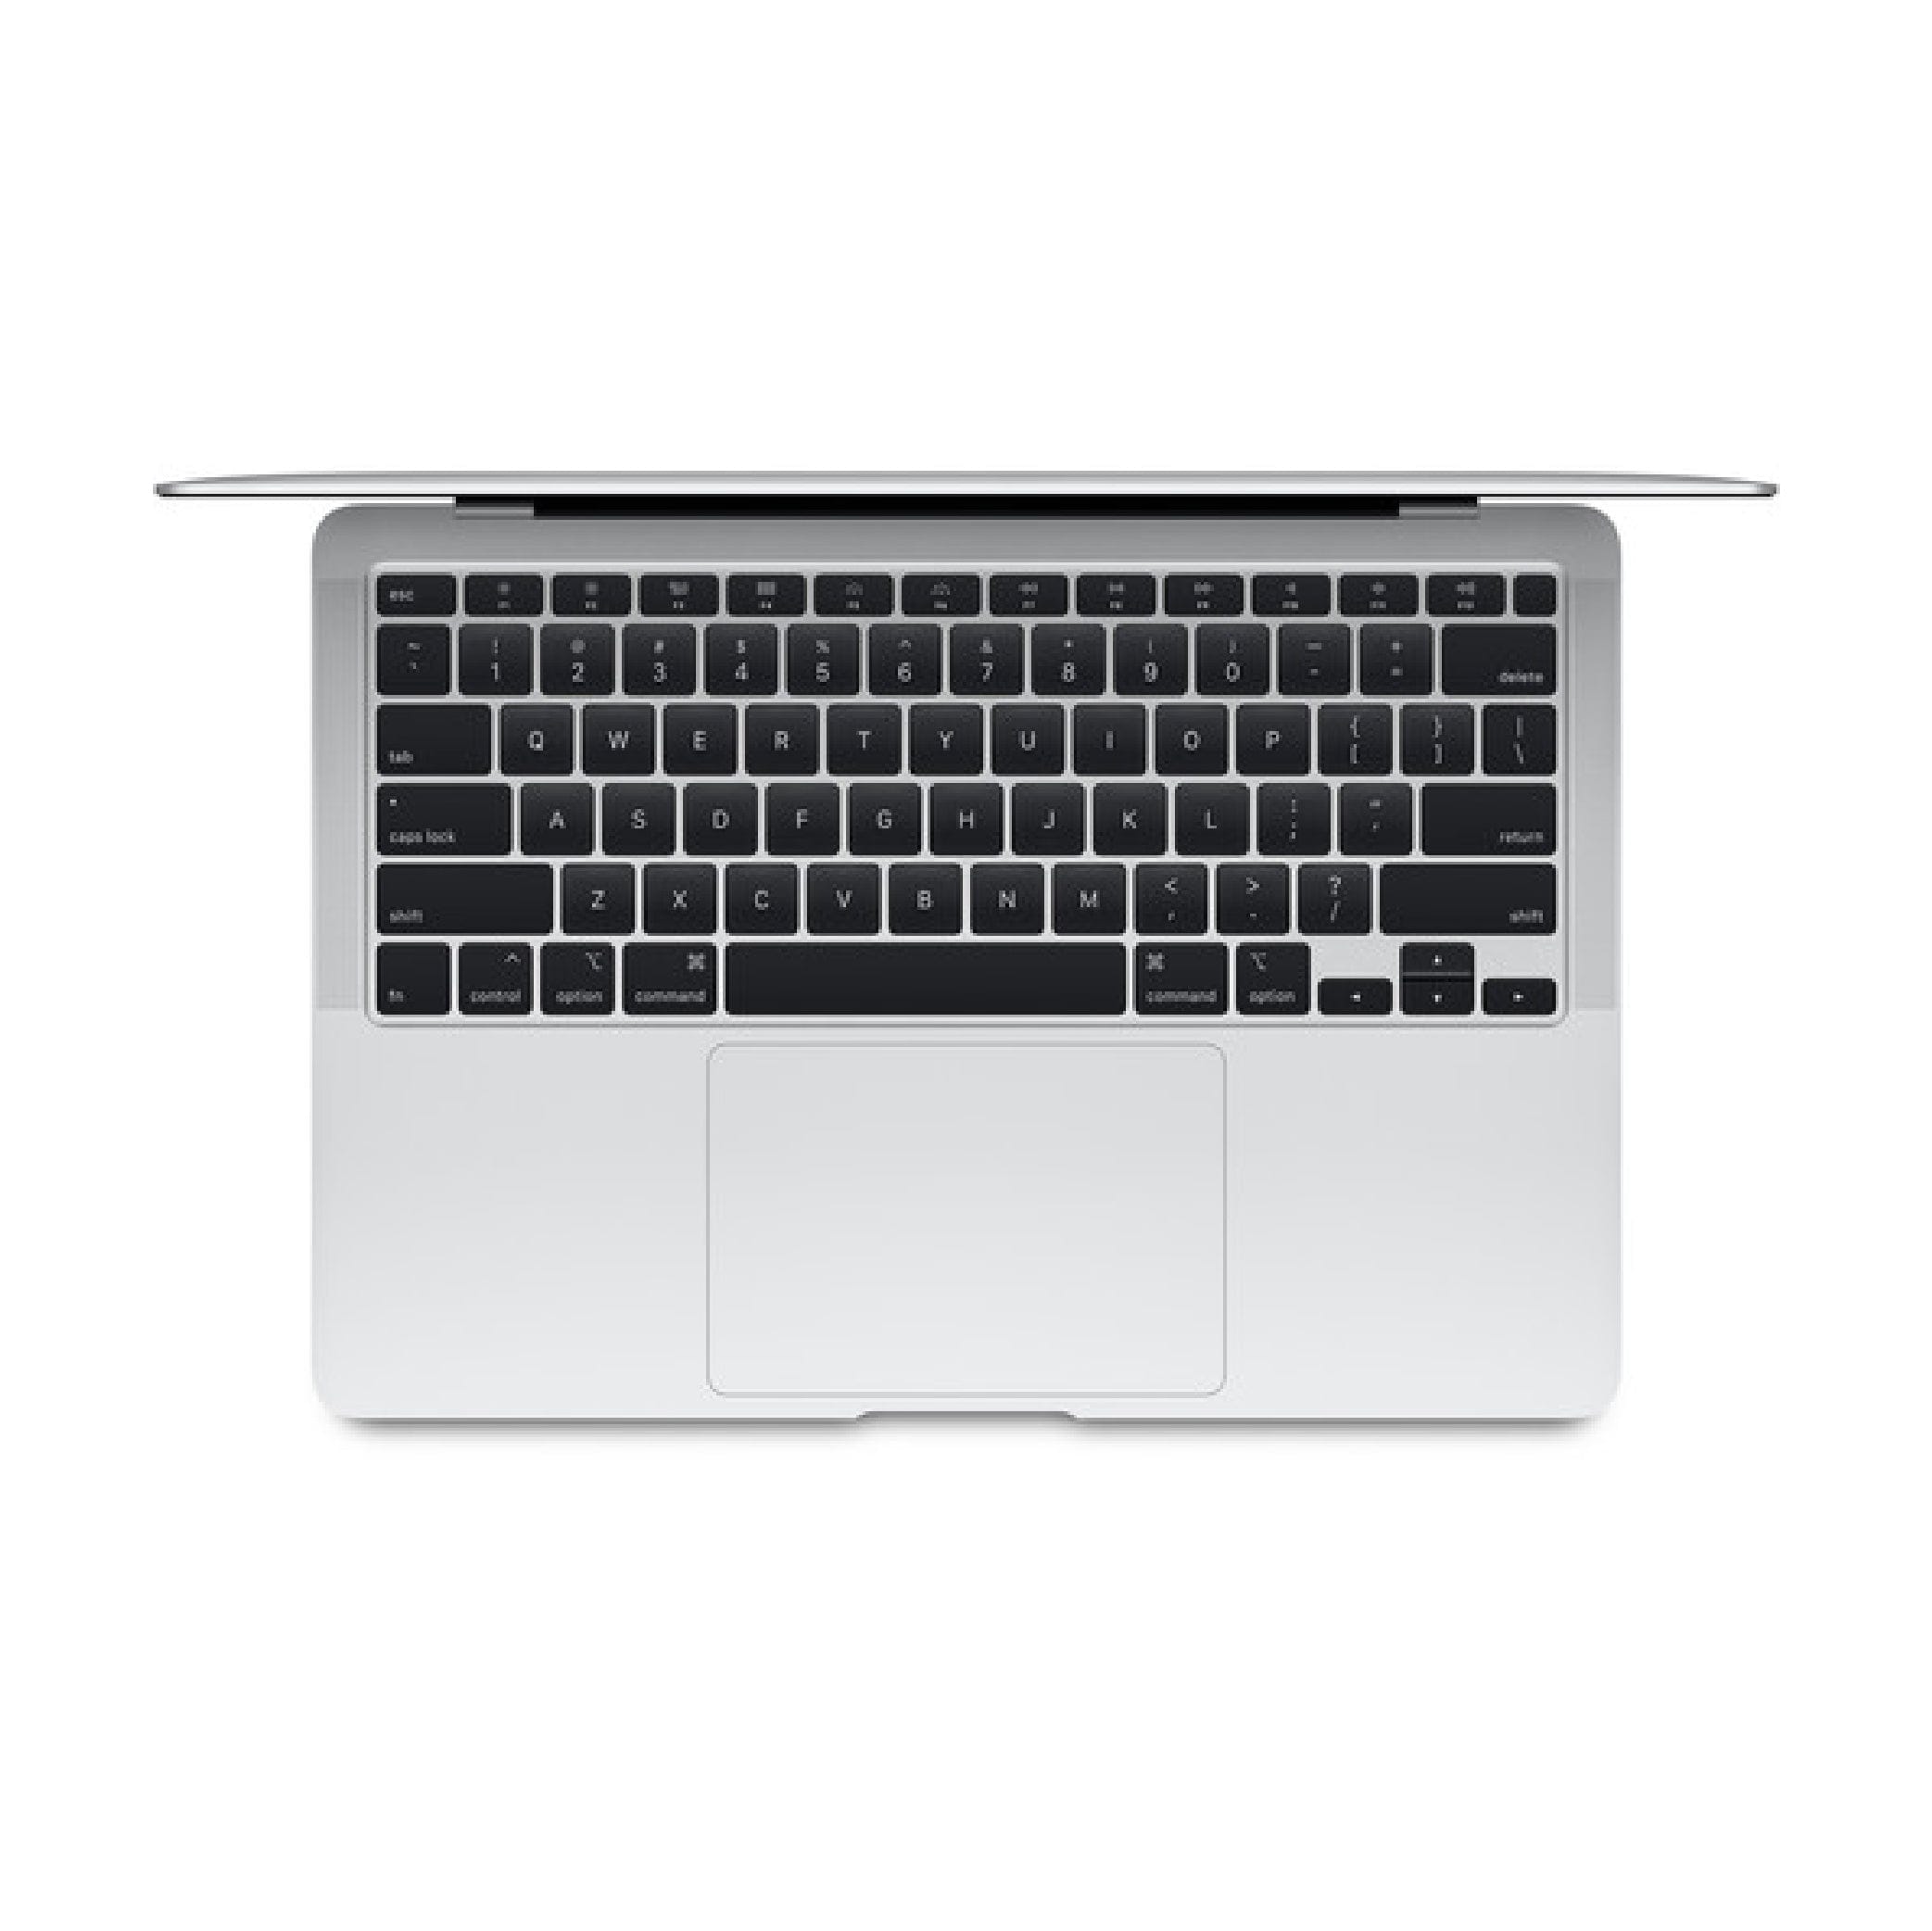 Apple  MacBook Air 13.3" MVFL2LL/A Laptop with Touch ID - Intel Core i5 - 8GB Memory - 256GB Solid State Drive - Silver